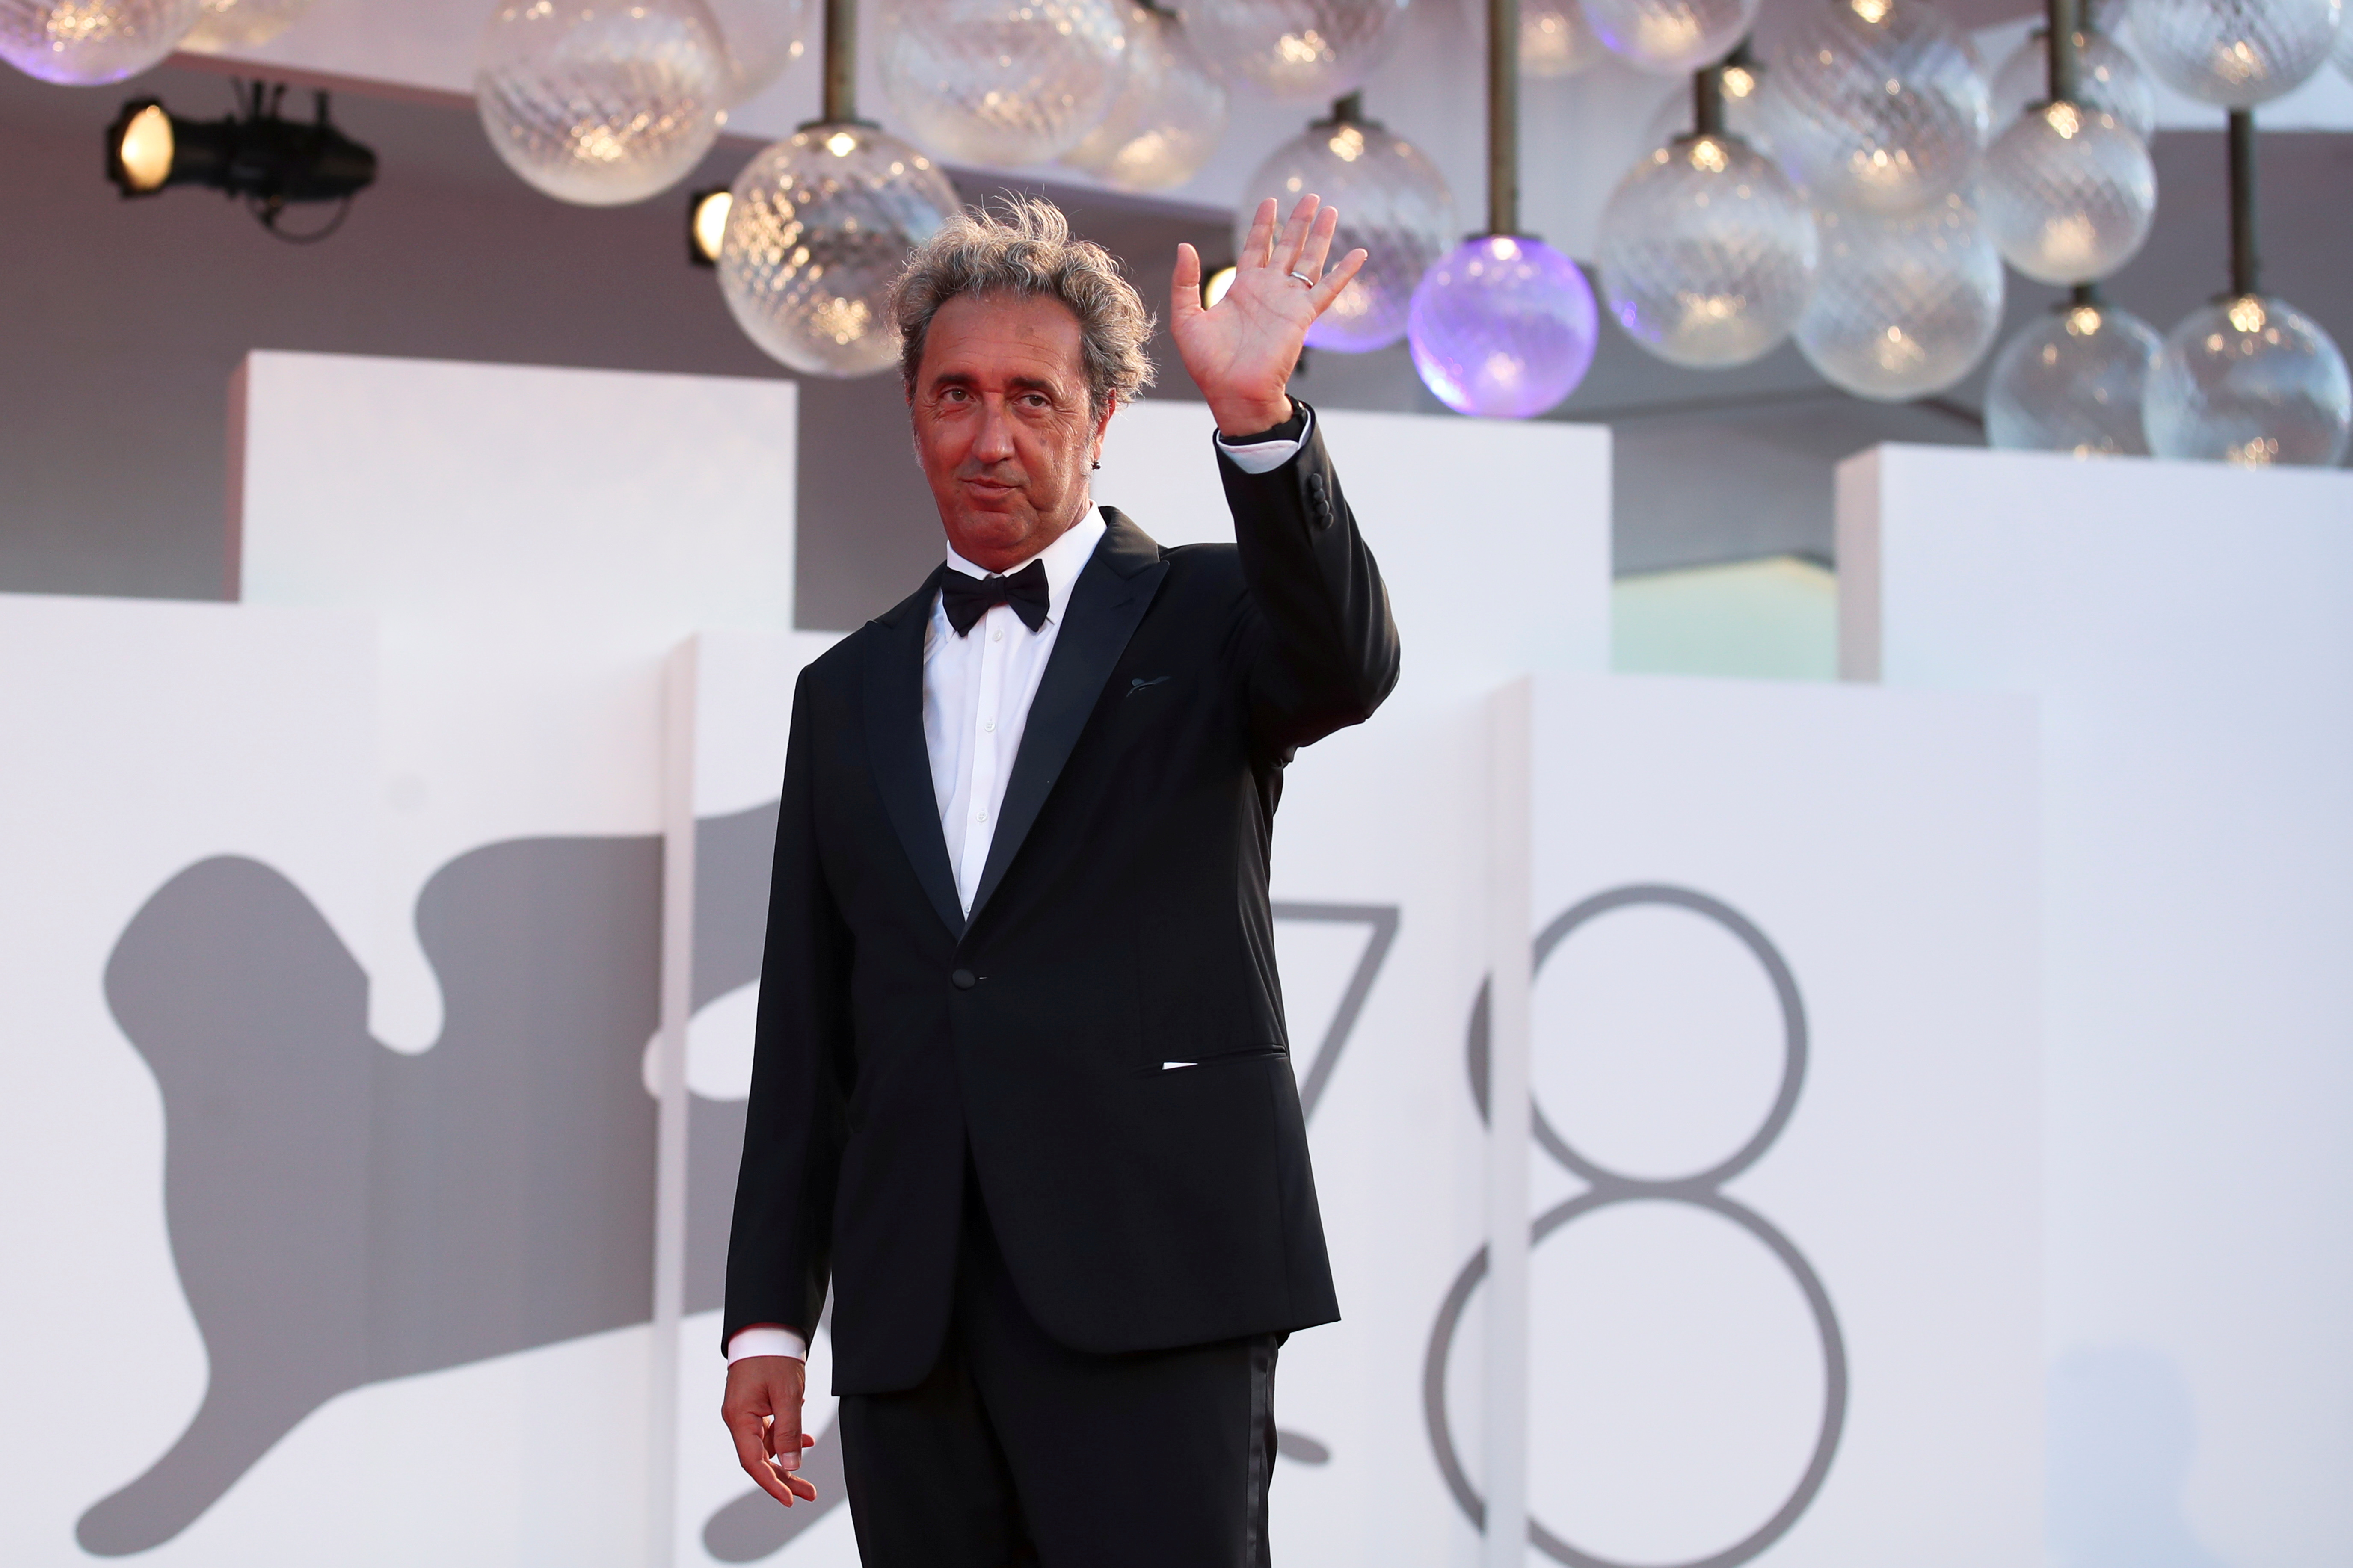 The 78th Venice Film Festival - Screening of the film 'The Hand of God' in competition- Red Carpet Arrivals - Venice, Italy September 2, 2021 - Director Paolo Sorrentino poses. REUTERS/Yara Nardi